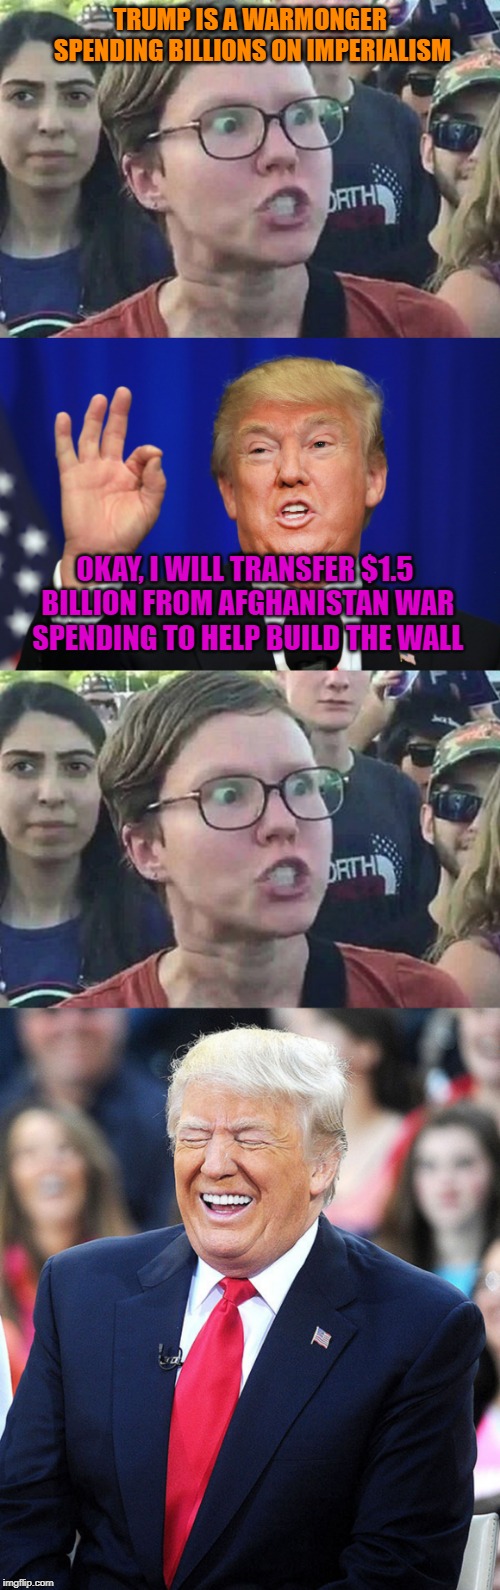 They are never happy | TRUMP IS A WARMONGER SPENDING BILLIONS ON IMPERIALISM; OKAY, I WILL TRANSFER $1.5 BILLION FROM AFGHANISTAN WAR SPENDING TO HELP BUILD THE WALL | image tagged in triggered liberal,trump laughing,the best trump,politics,libtards,build a wall | made w/ Imgflip meme maker